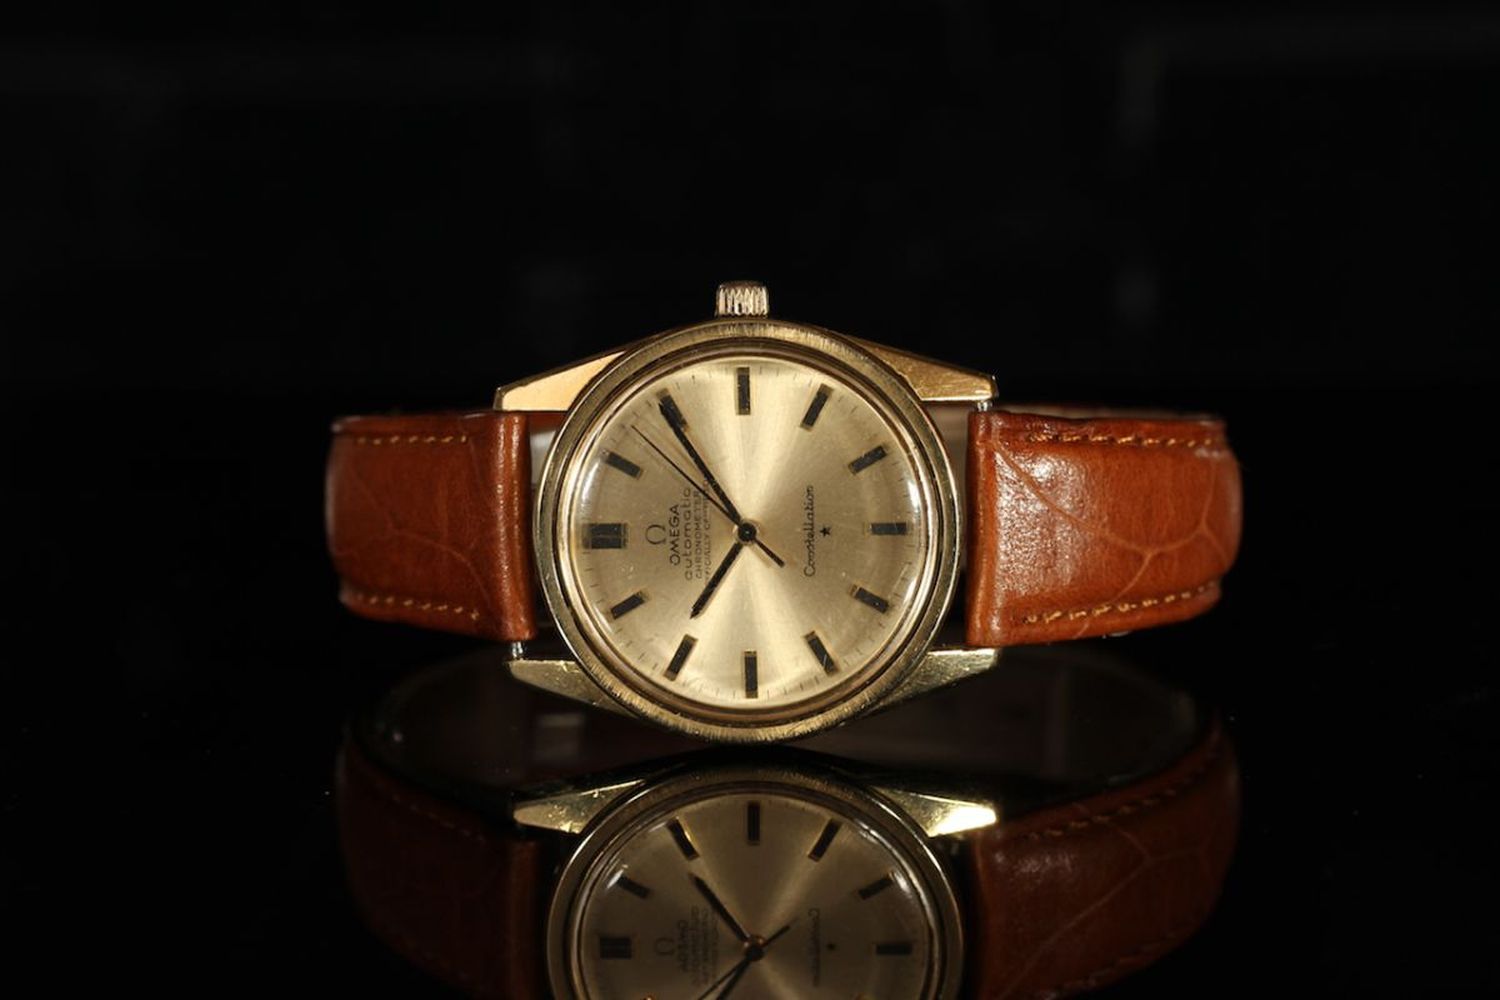 GENTLEMENS OMEGA CONSTELLATION AUTOMATIC WRISTWATCH REF. 167.021, circular gold brushed dial with